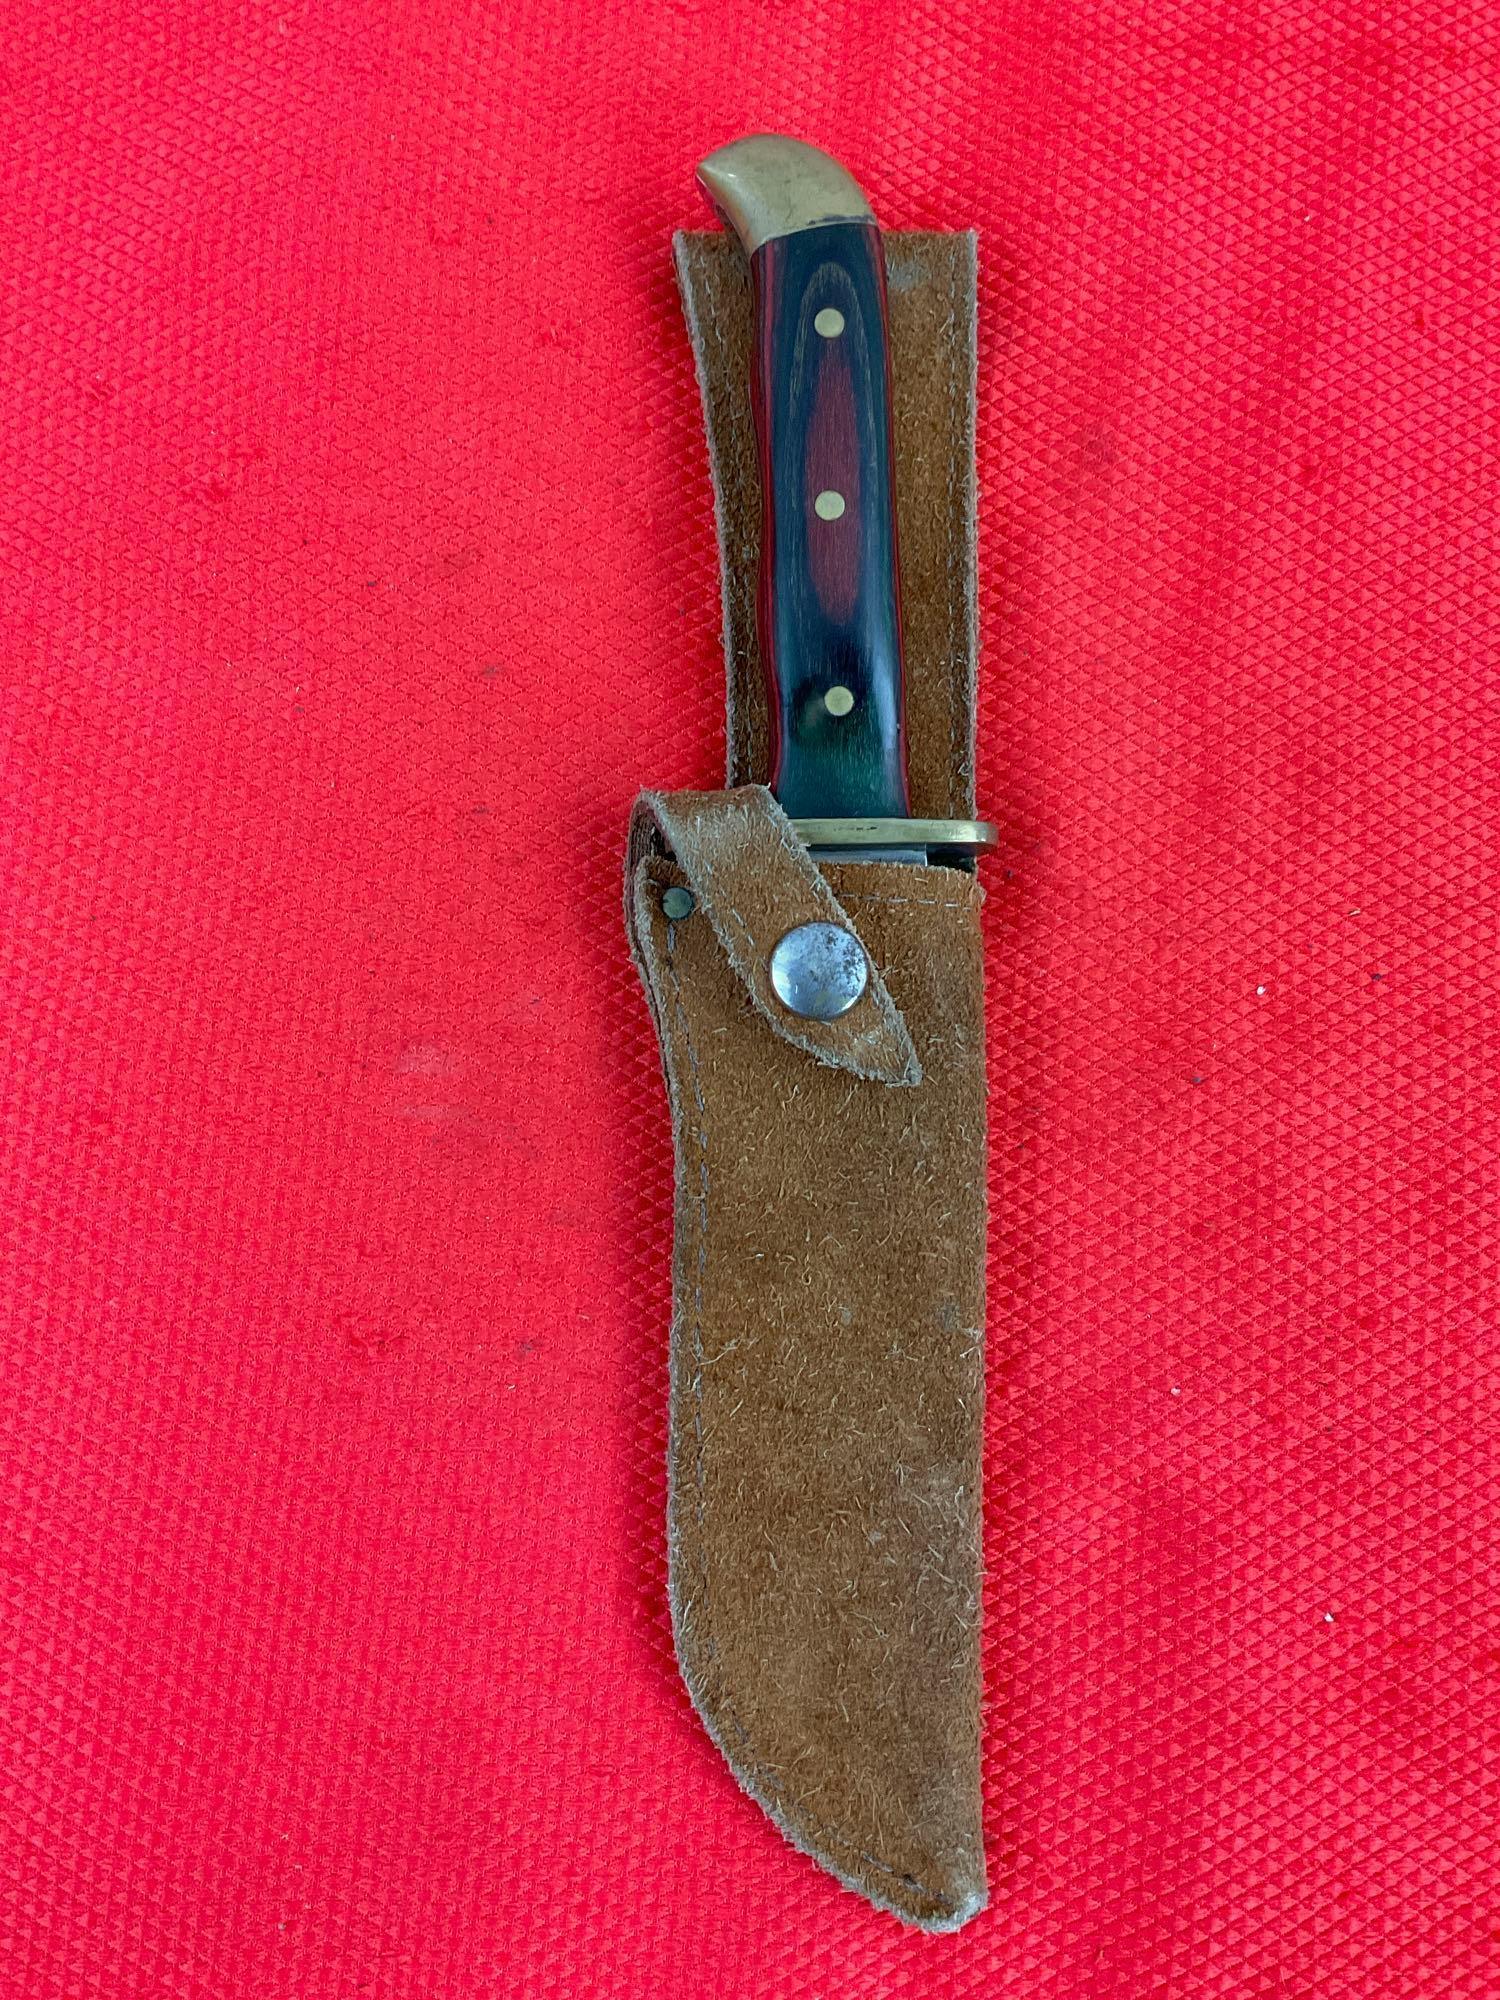 5" Steel Fixed Blade Bowie Knife w/ Wooden Sheath & Leather Sheath. Unknown Maker. See pics.